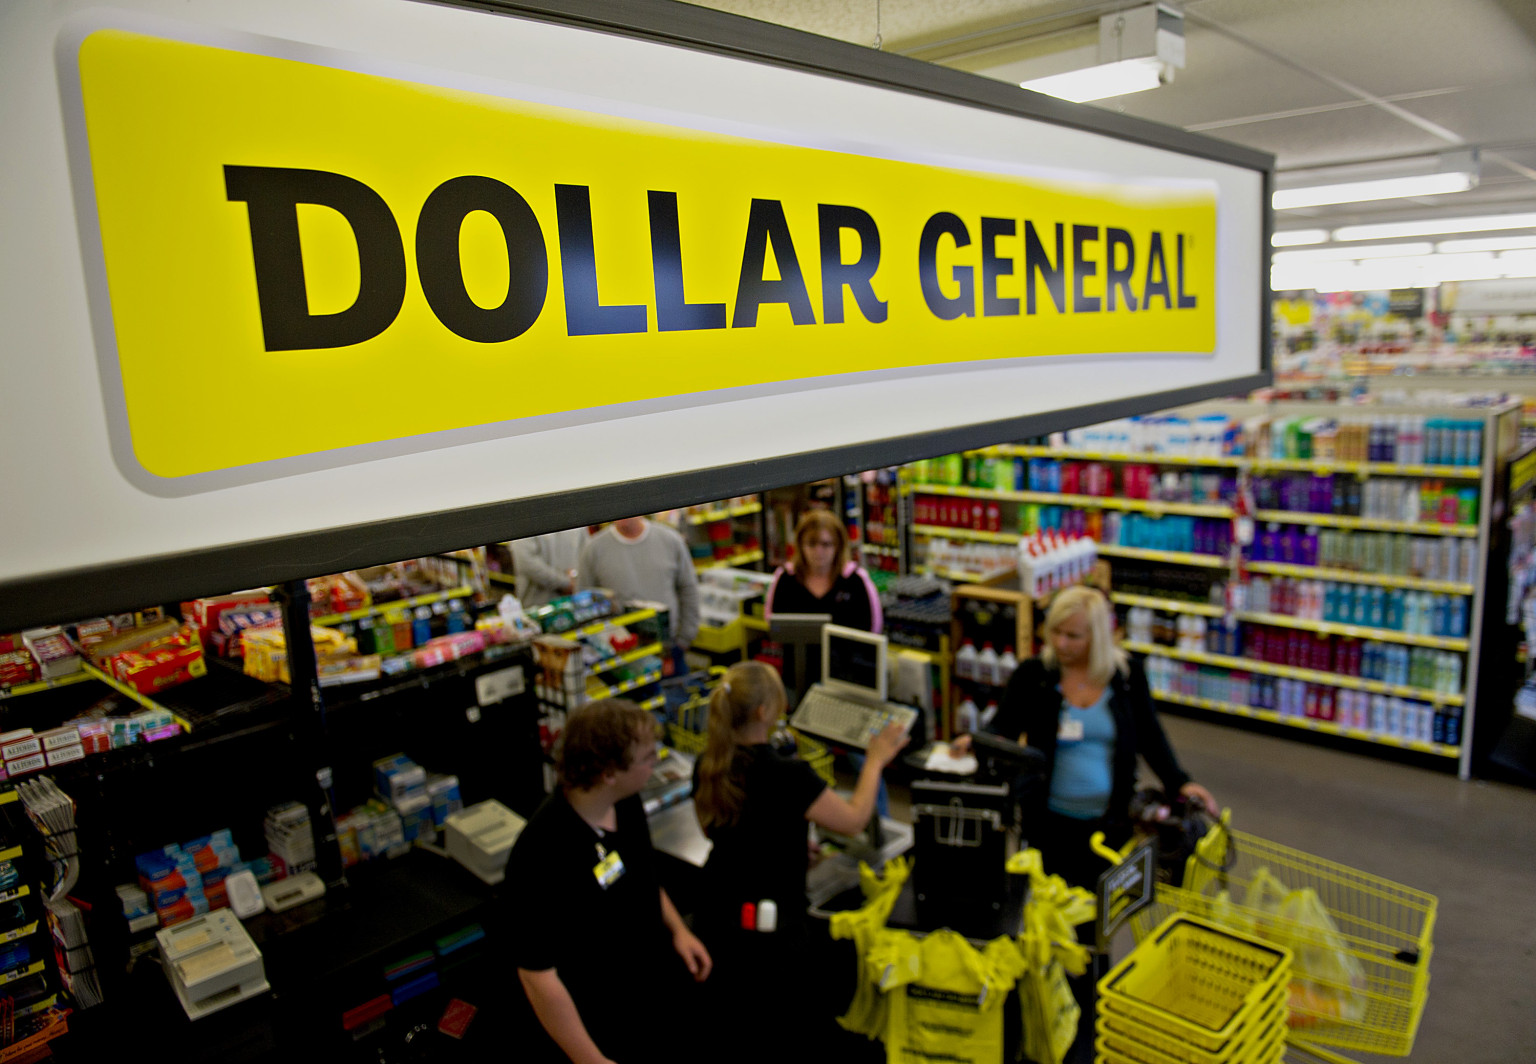 What kind of business is the Dollarama store?